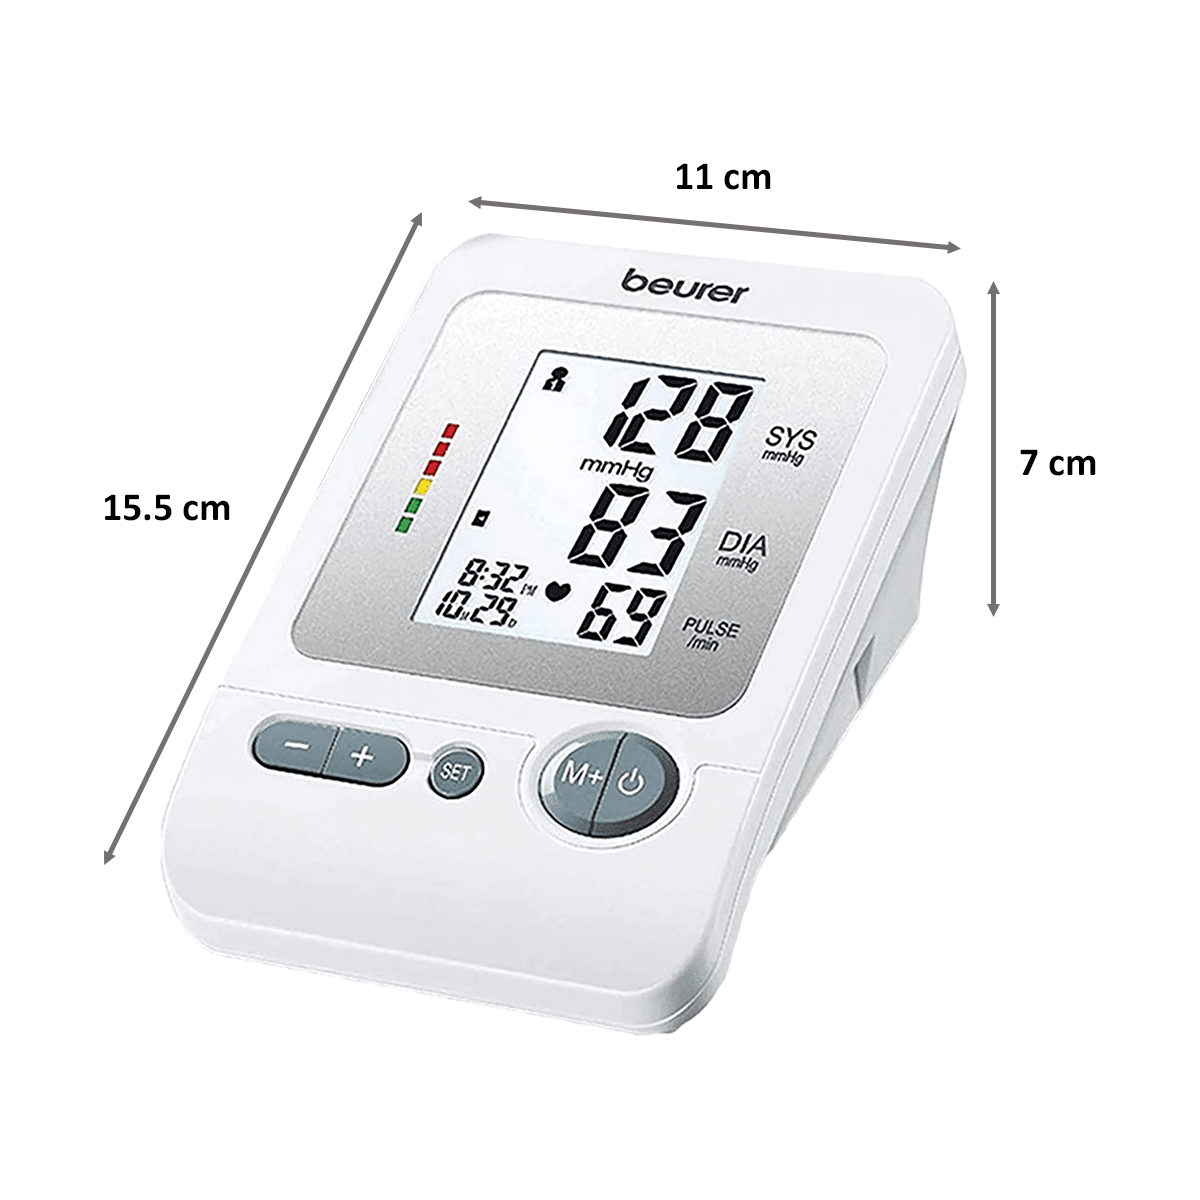 Beurer BM 26 Upper Arm Blood Pressure Monitor (Automatic Blood Pressure and Pulse Measurement, White)_2